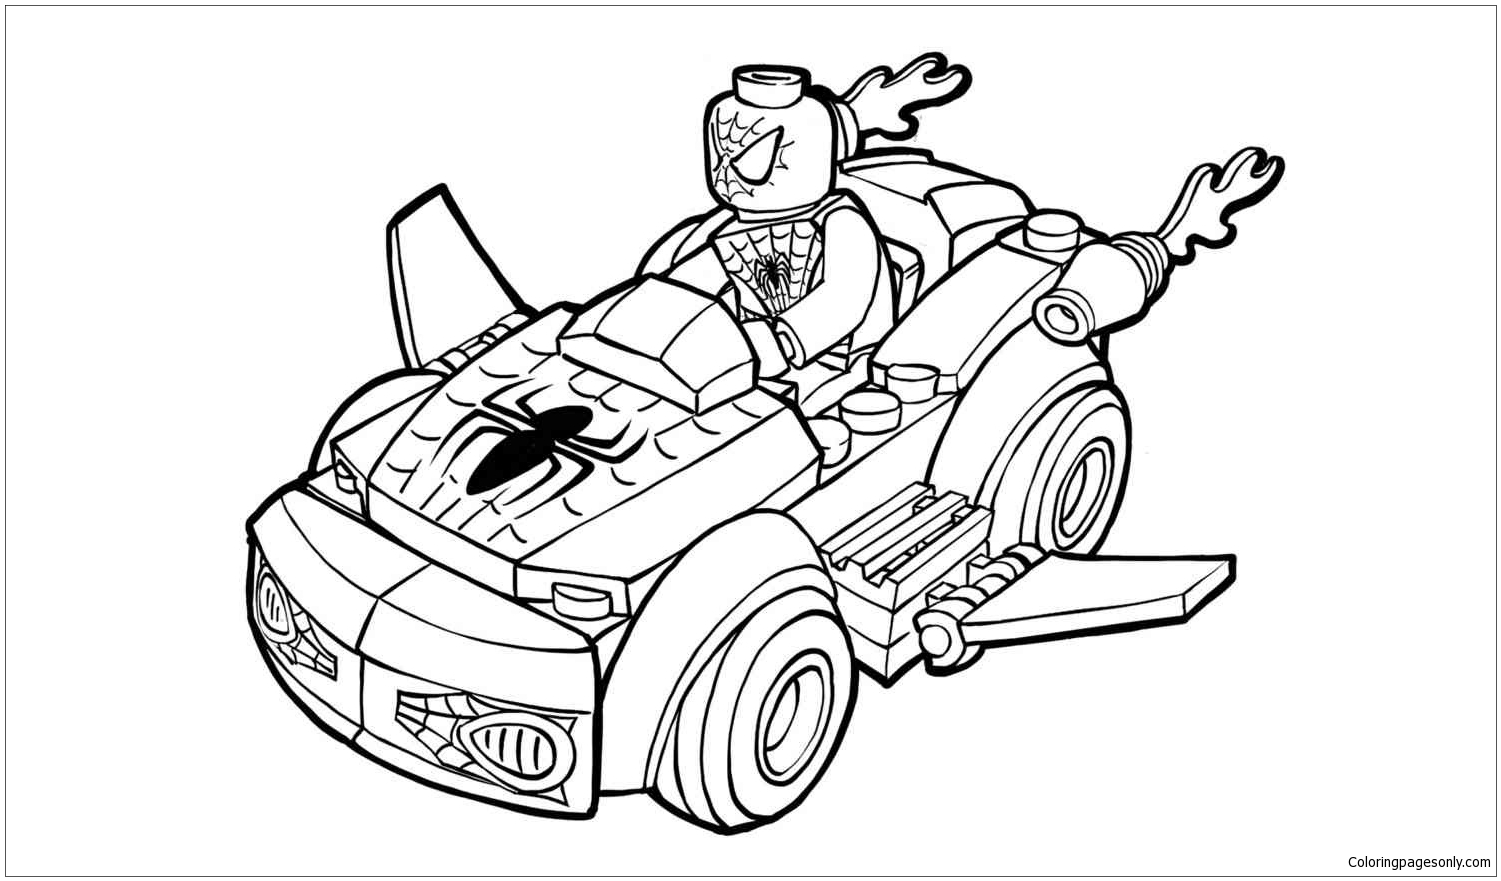 Lego Spiderman superhero coloring pages